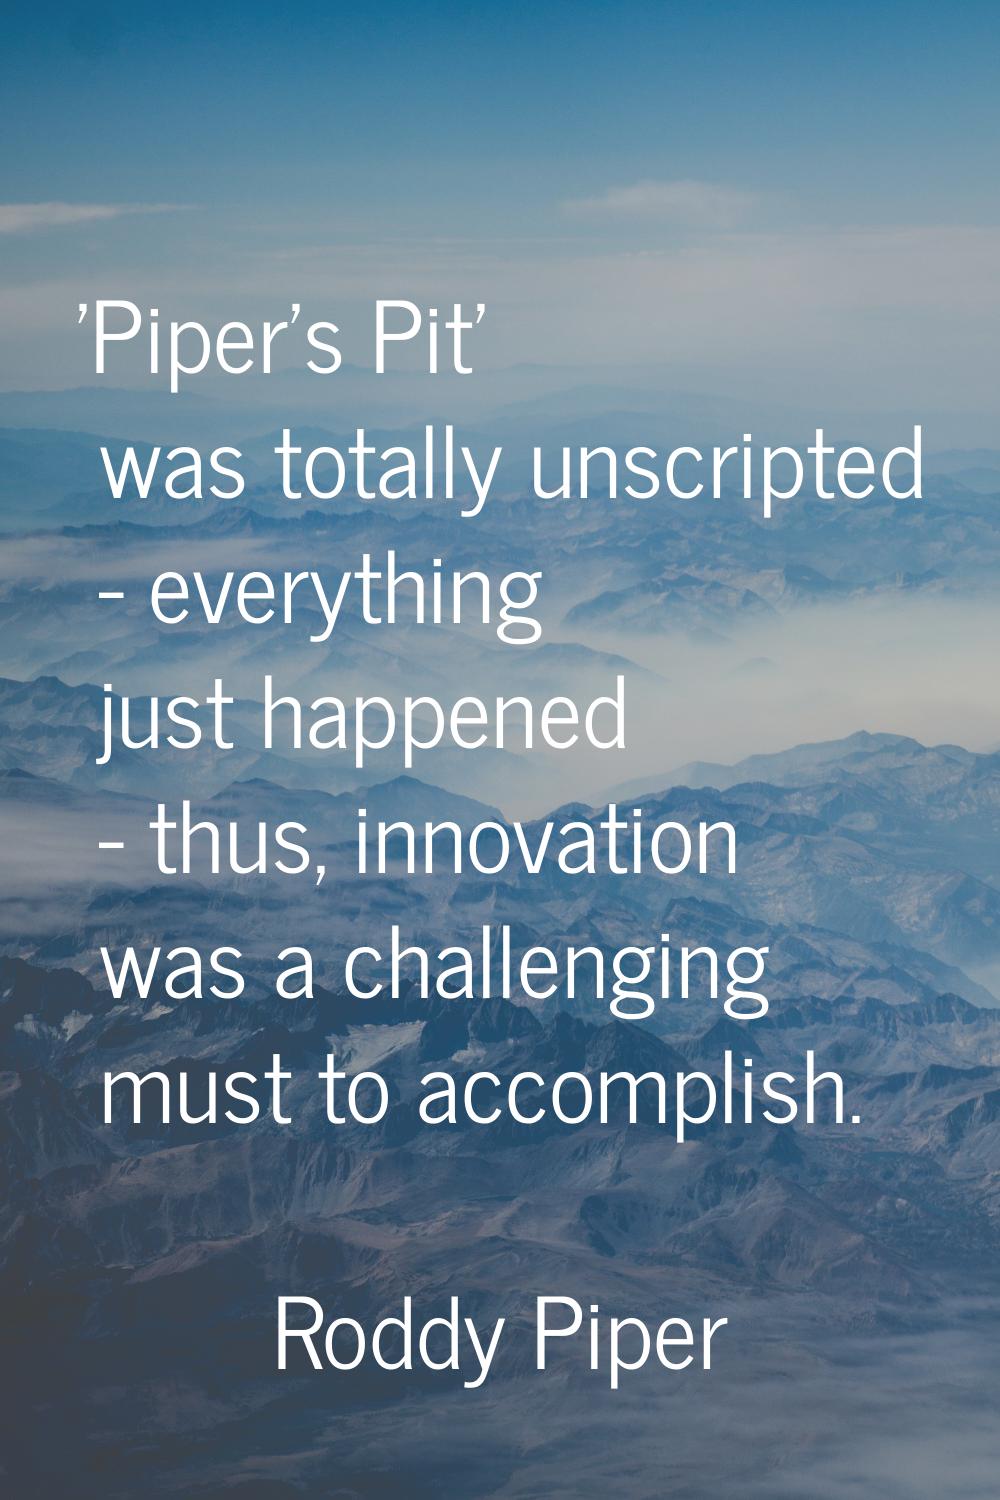 'Piper's Pit' was totally unscripted - everything just happened - thus, innovation was a challengin